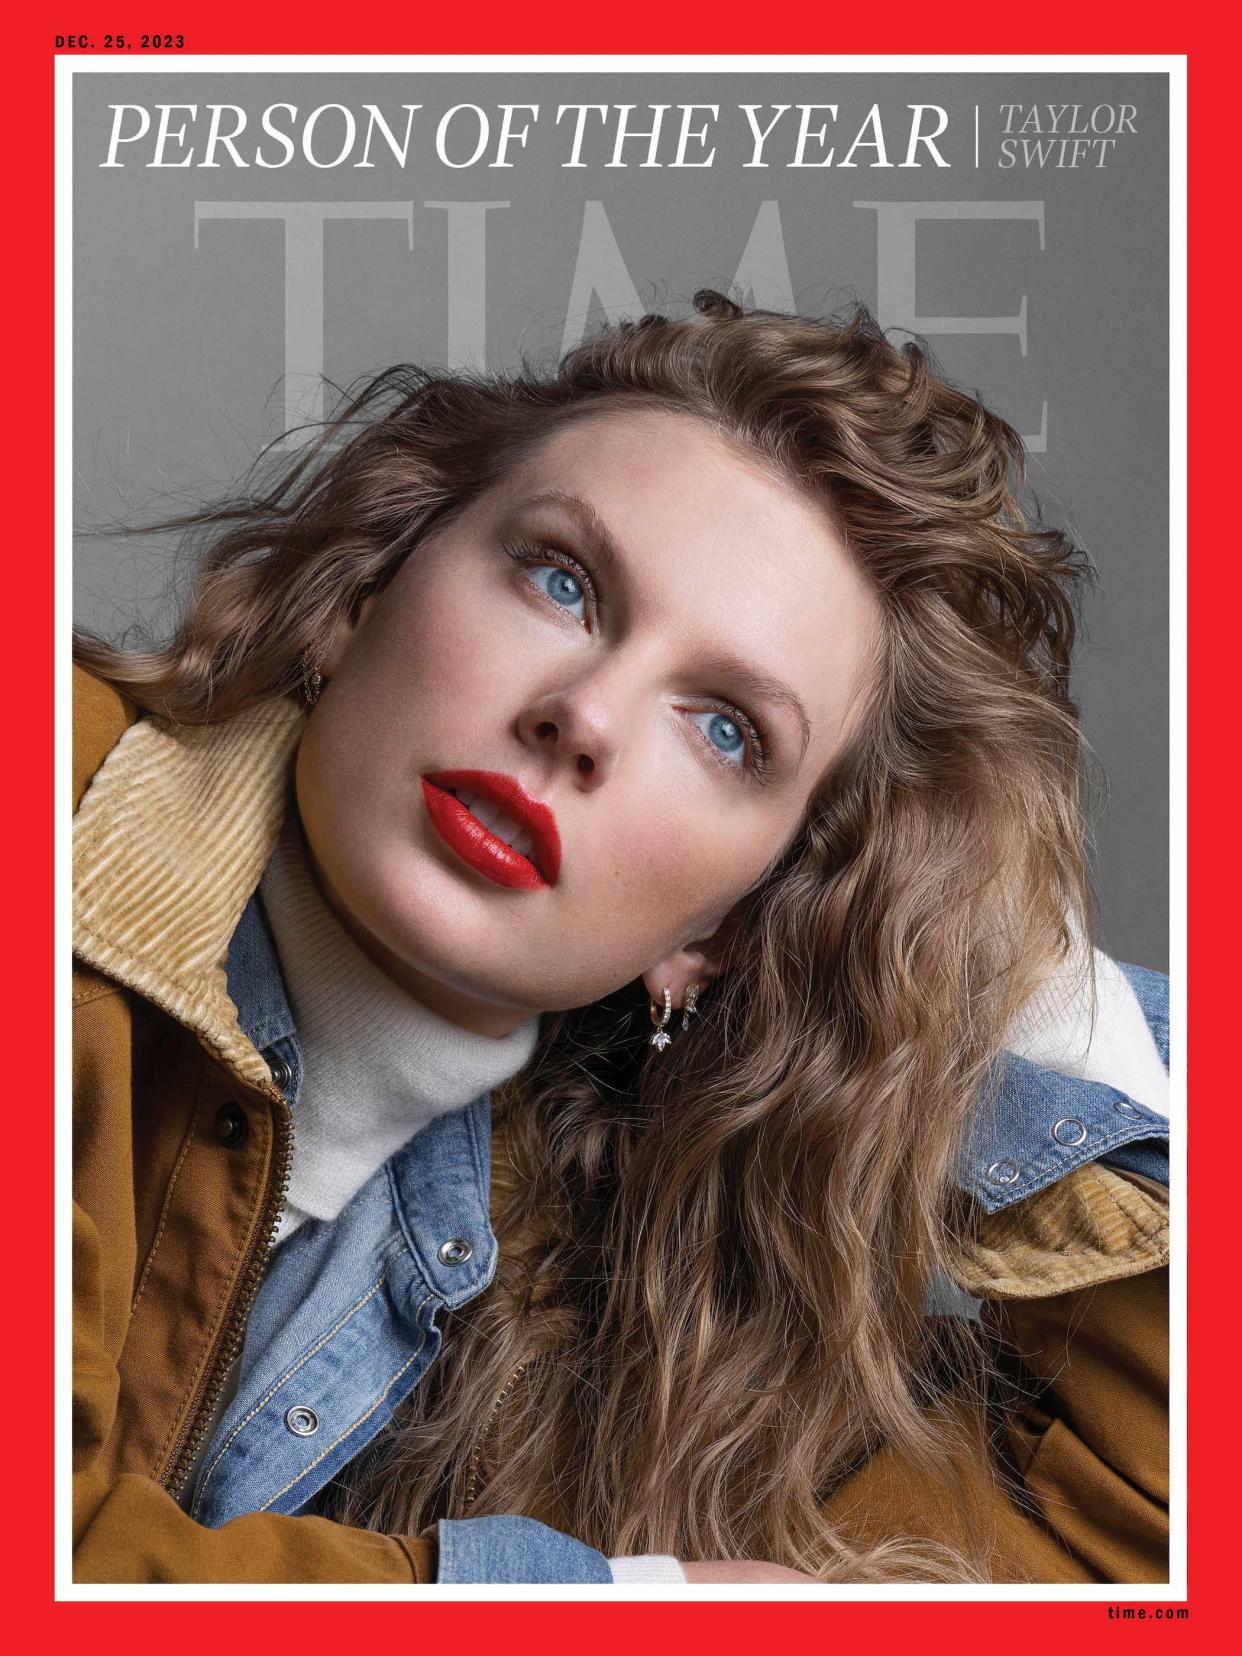 taylor swift time magazine person of the year cover